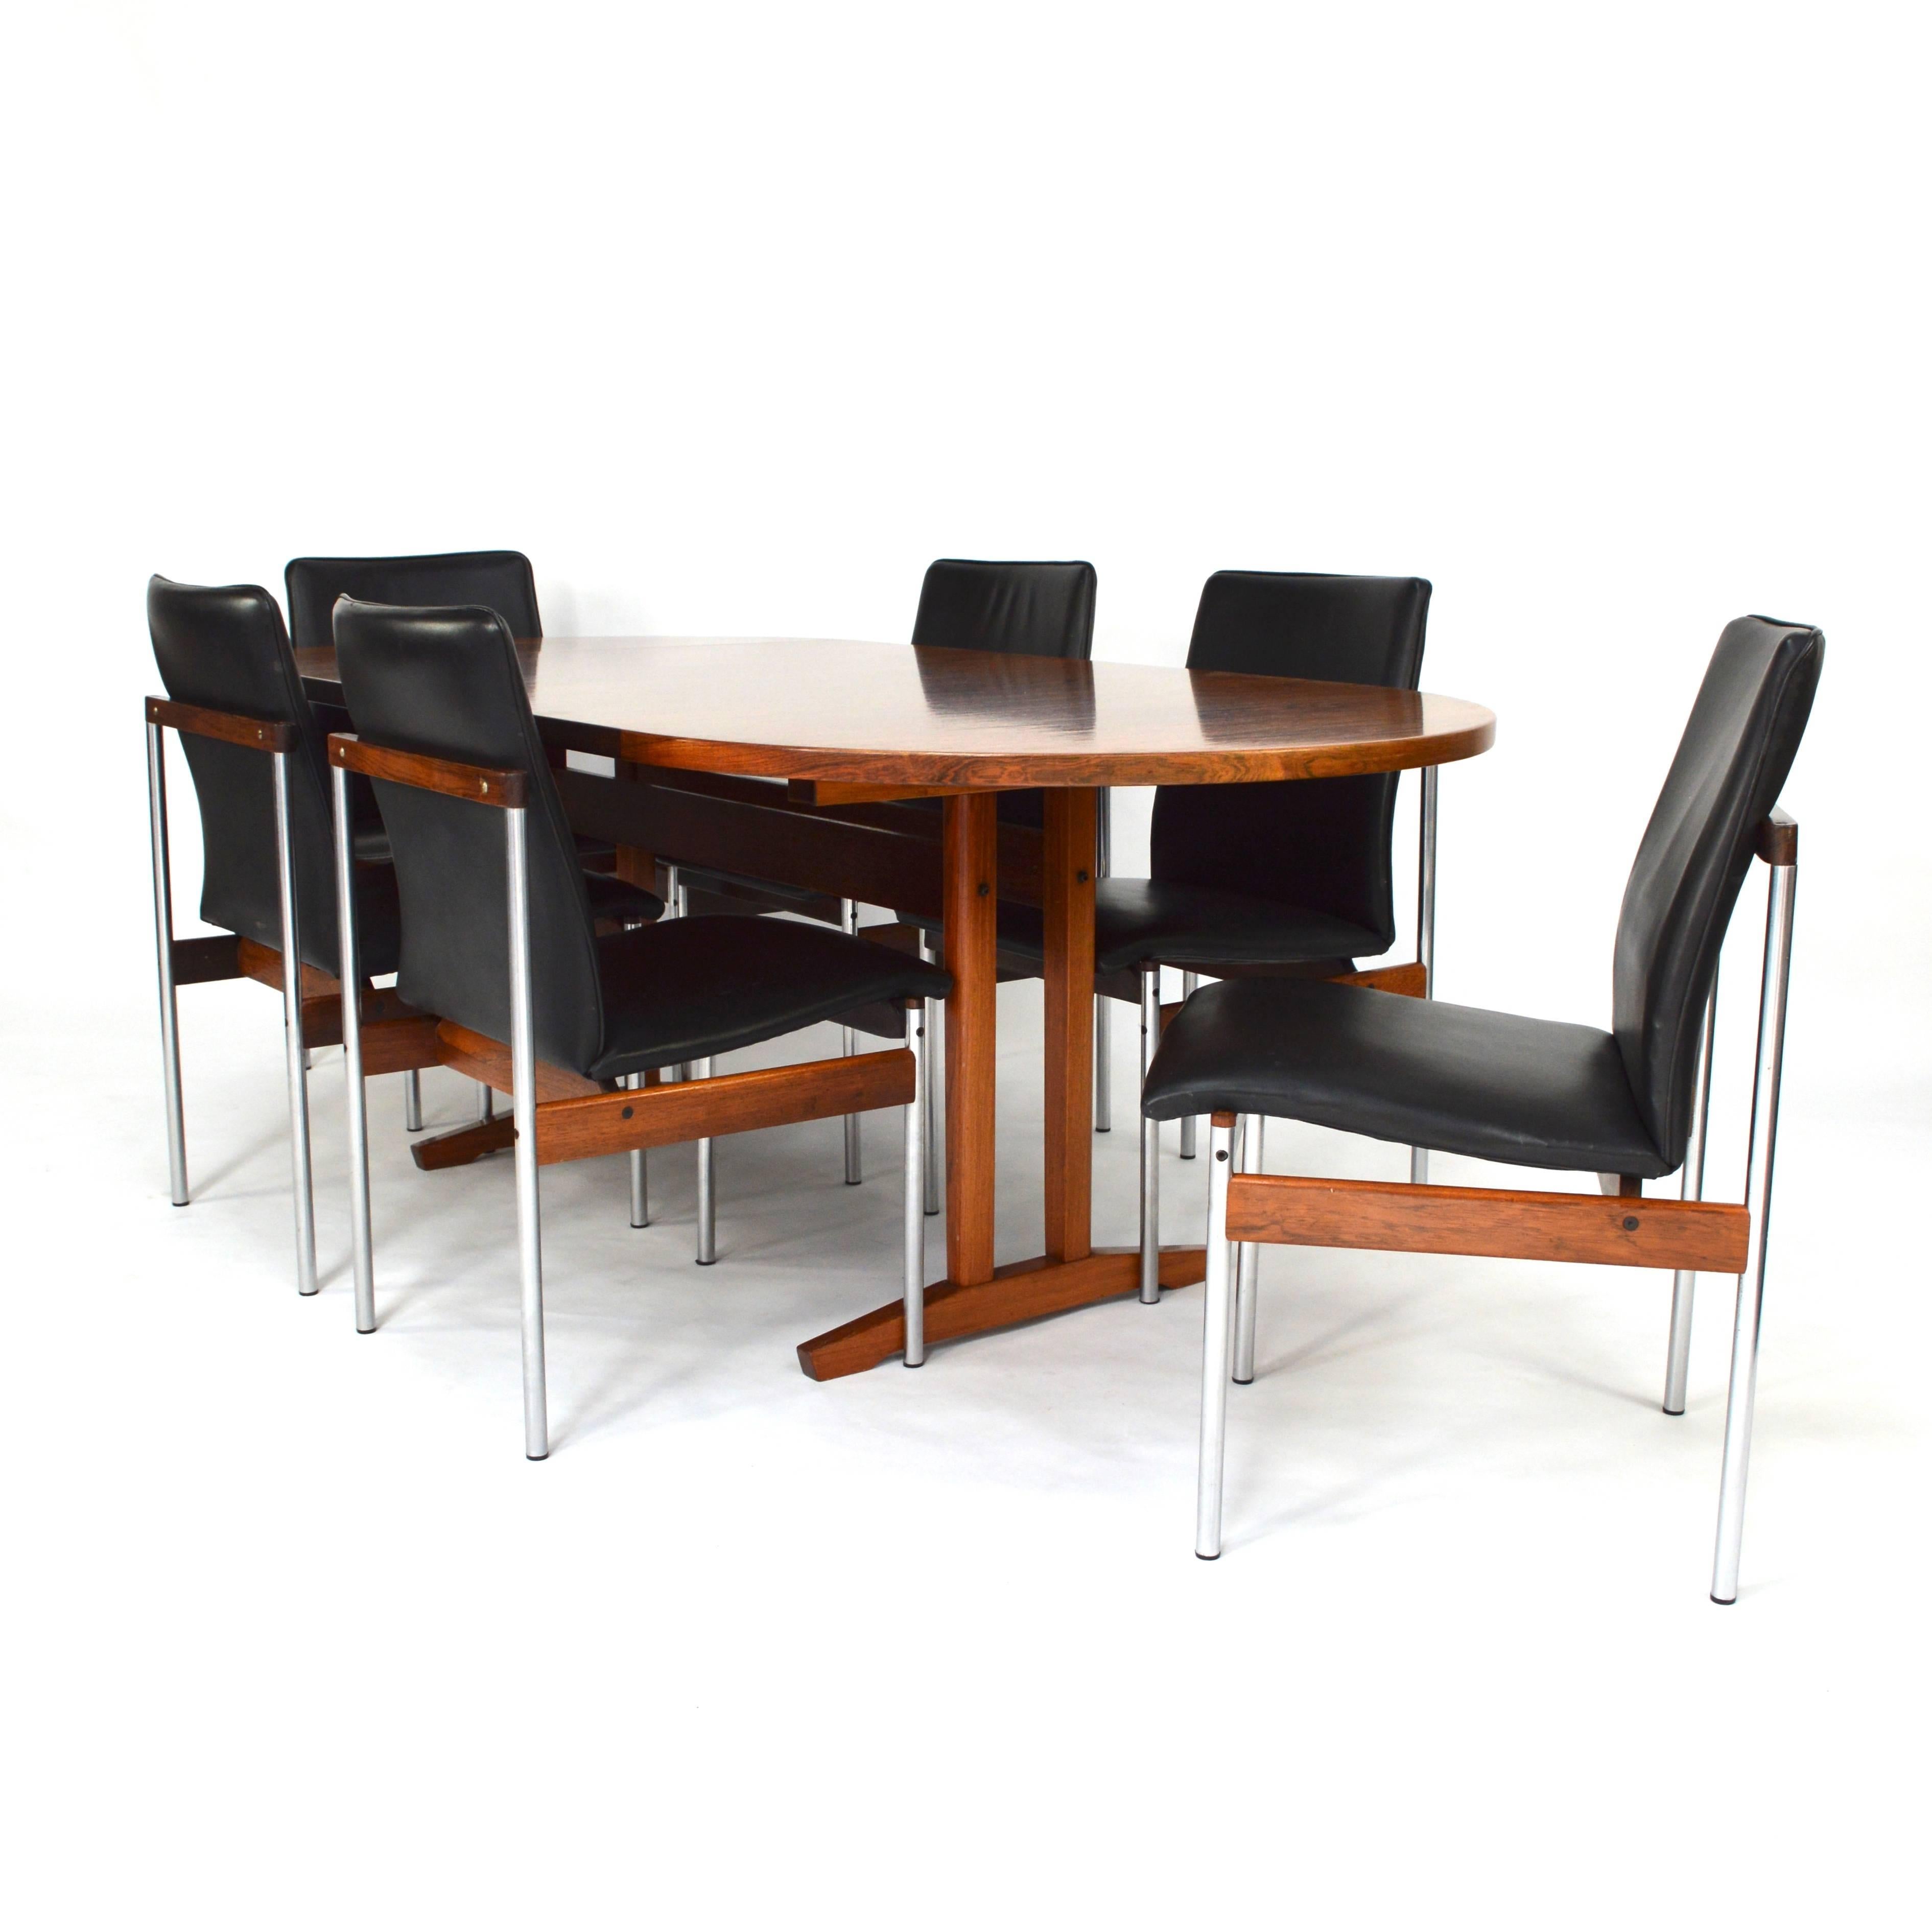 Set of six dining chairs by Thereca.
Design after Inger Klingerberg.
Made of solid Brazilian rosewood, black leather and chrome.
Also available with the dining table.
In very good condition.
We offer very competitive shipping prices.